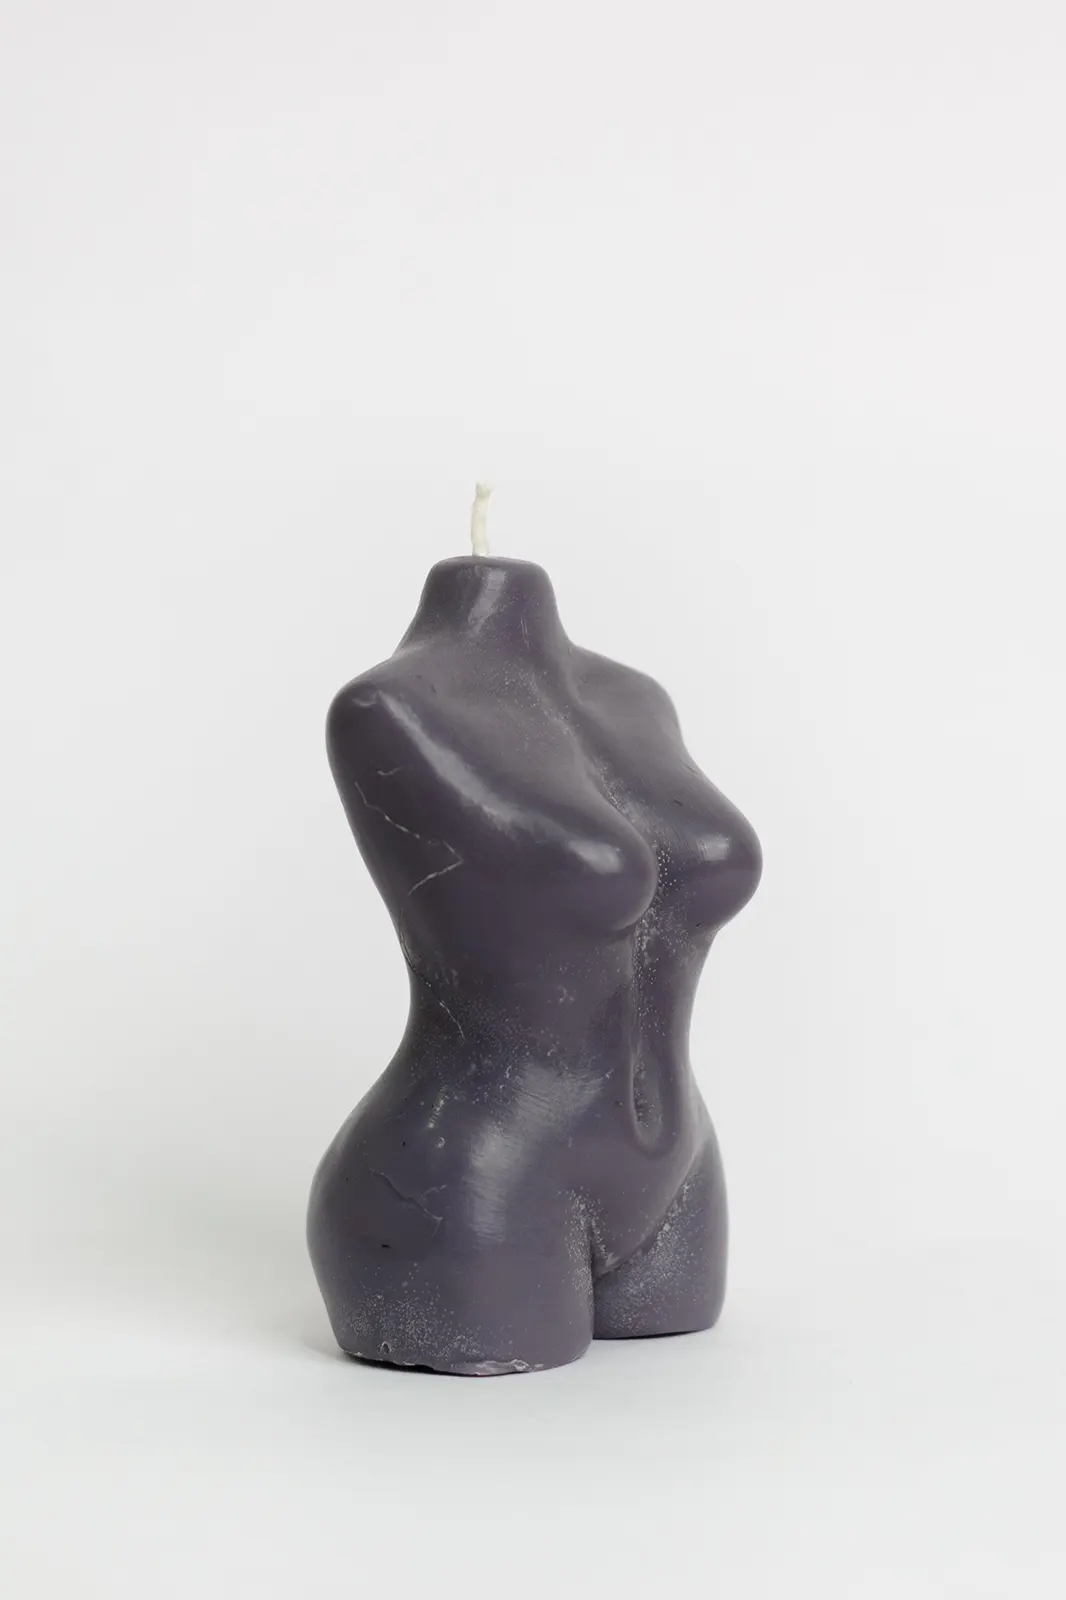 Women torso candle midnight blue hazelnut coffee delight, body shape candle, coffee candle, coffee candle fragrance, soy wax candles, scented candles, candles, fresh coffee candle, lady shape candle, coffee aroma, hazelnut candle, beeswax candle, handmade organic candles, fragrance candle, toh candles, natural scented candles, coffee scented candle, coffee fragrance, coffee aroma, Toh, sepia stories